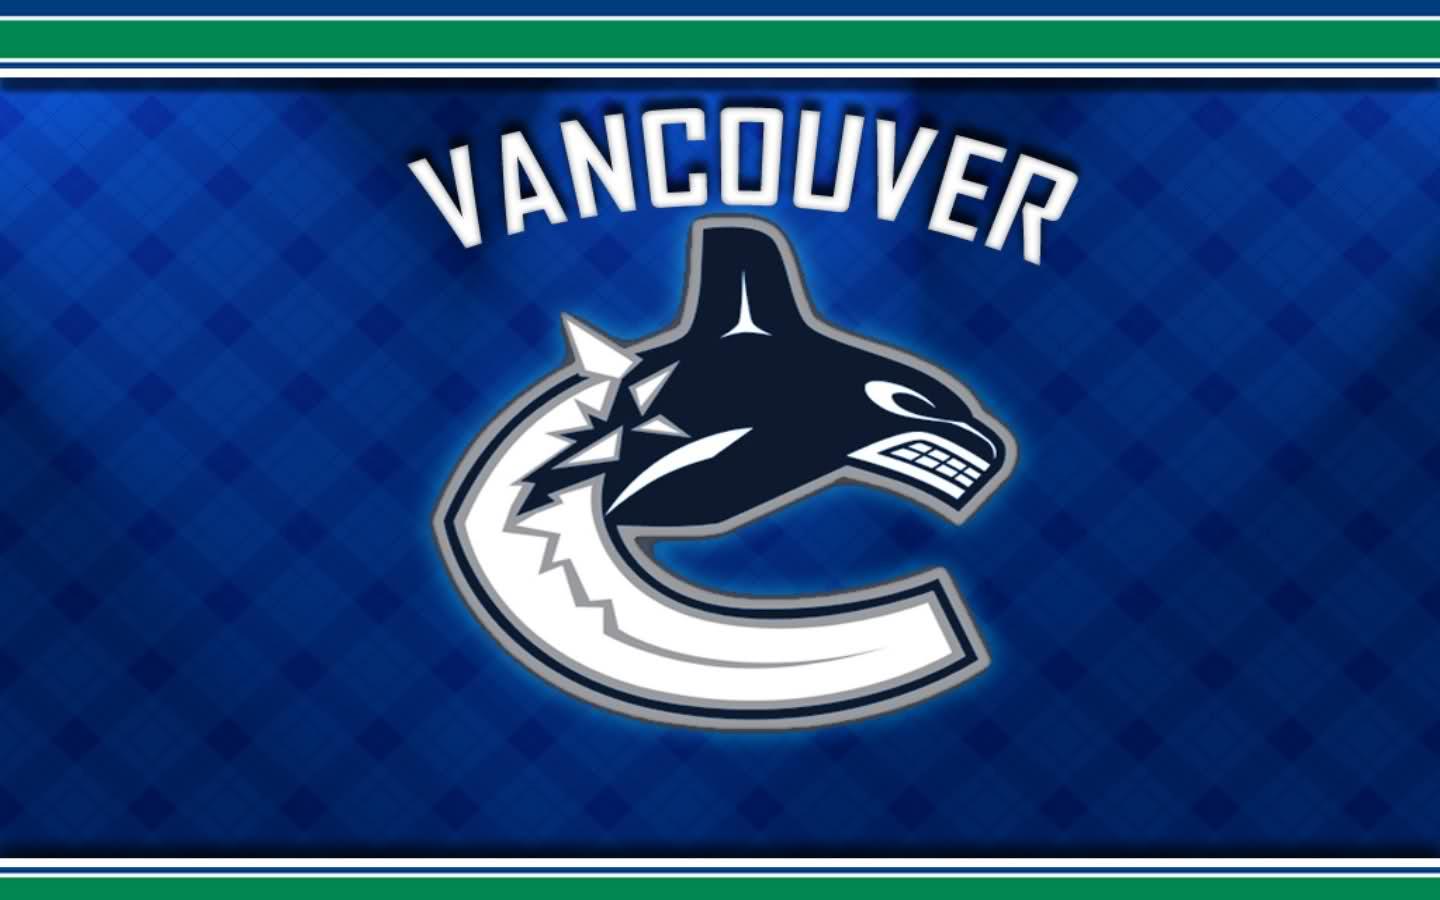 HDMOU: TOP 8 VARIOUS CANUCKS WALLPAPERS IN HD